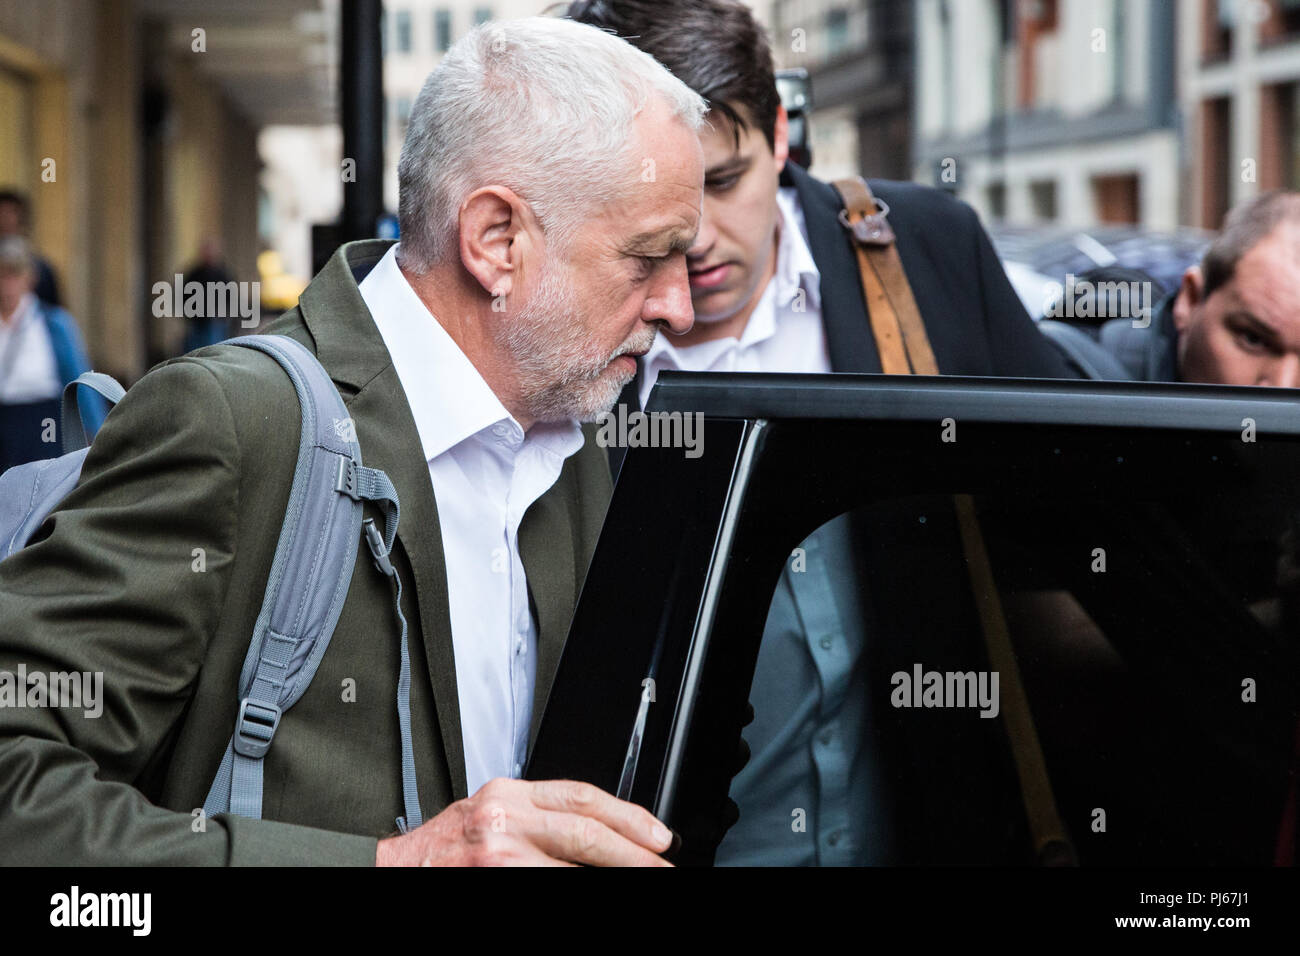 London, UK. 4th September, 2018. Labour Party leader Jeremy Corbyn leaves the party headquarters after its NEC ruling body adopted in full the IHRA definition and examples of anti-Semitism alongside a brief statement stating that freedom of expression on Israel or the rights of Palestinians should not be undermined. A longer accompanying clarification put forward by the party leader was rejected by the NEC. Credit: Mark Kerrison/Alamy Live News Stock Photo